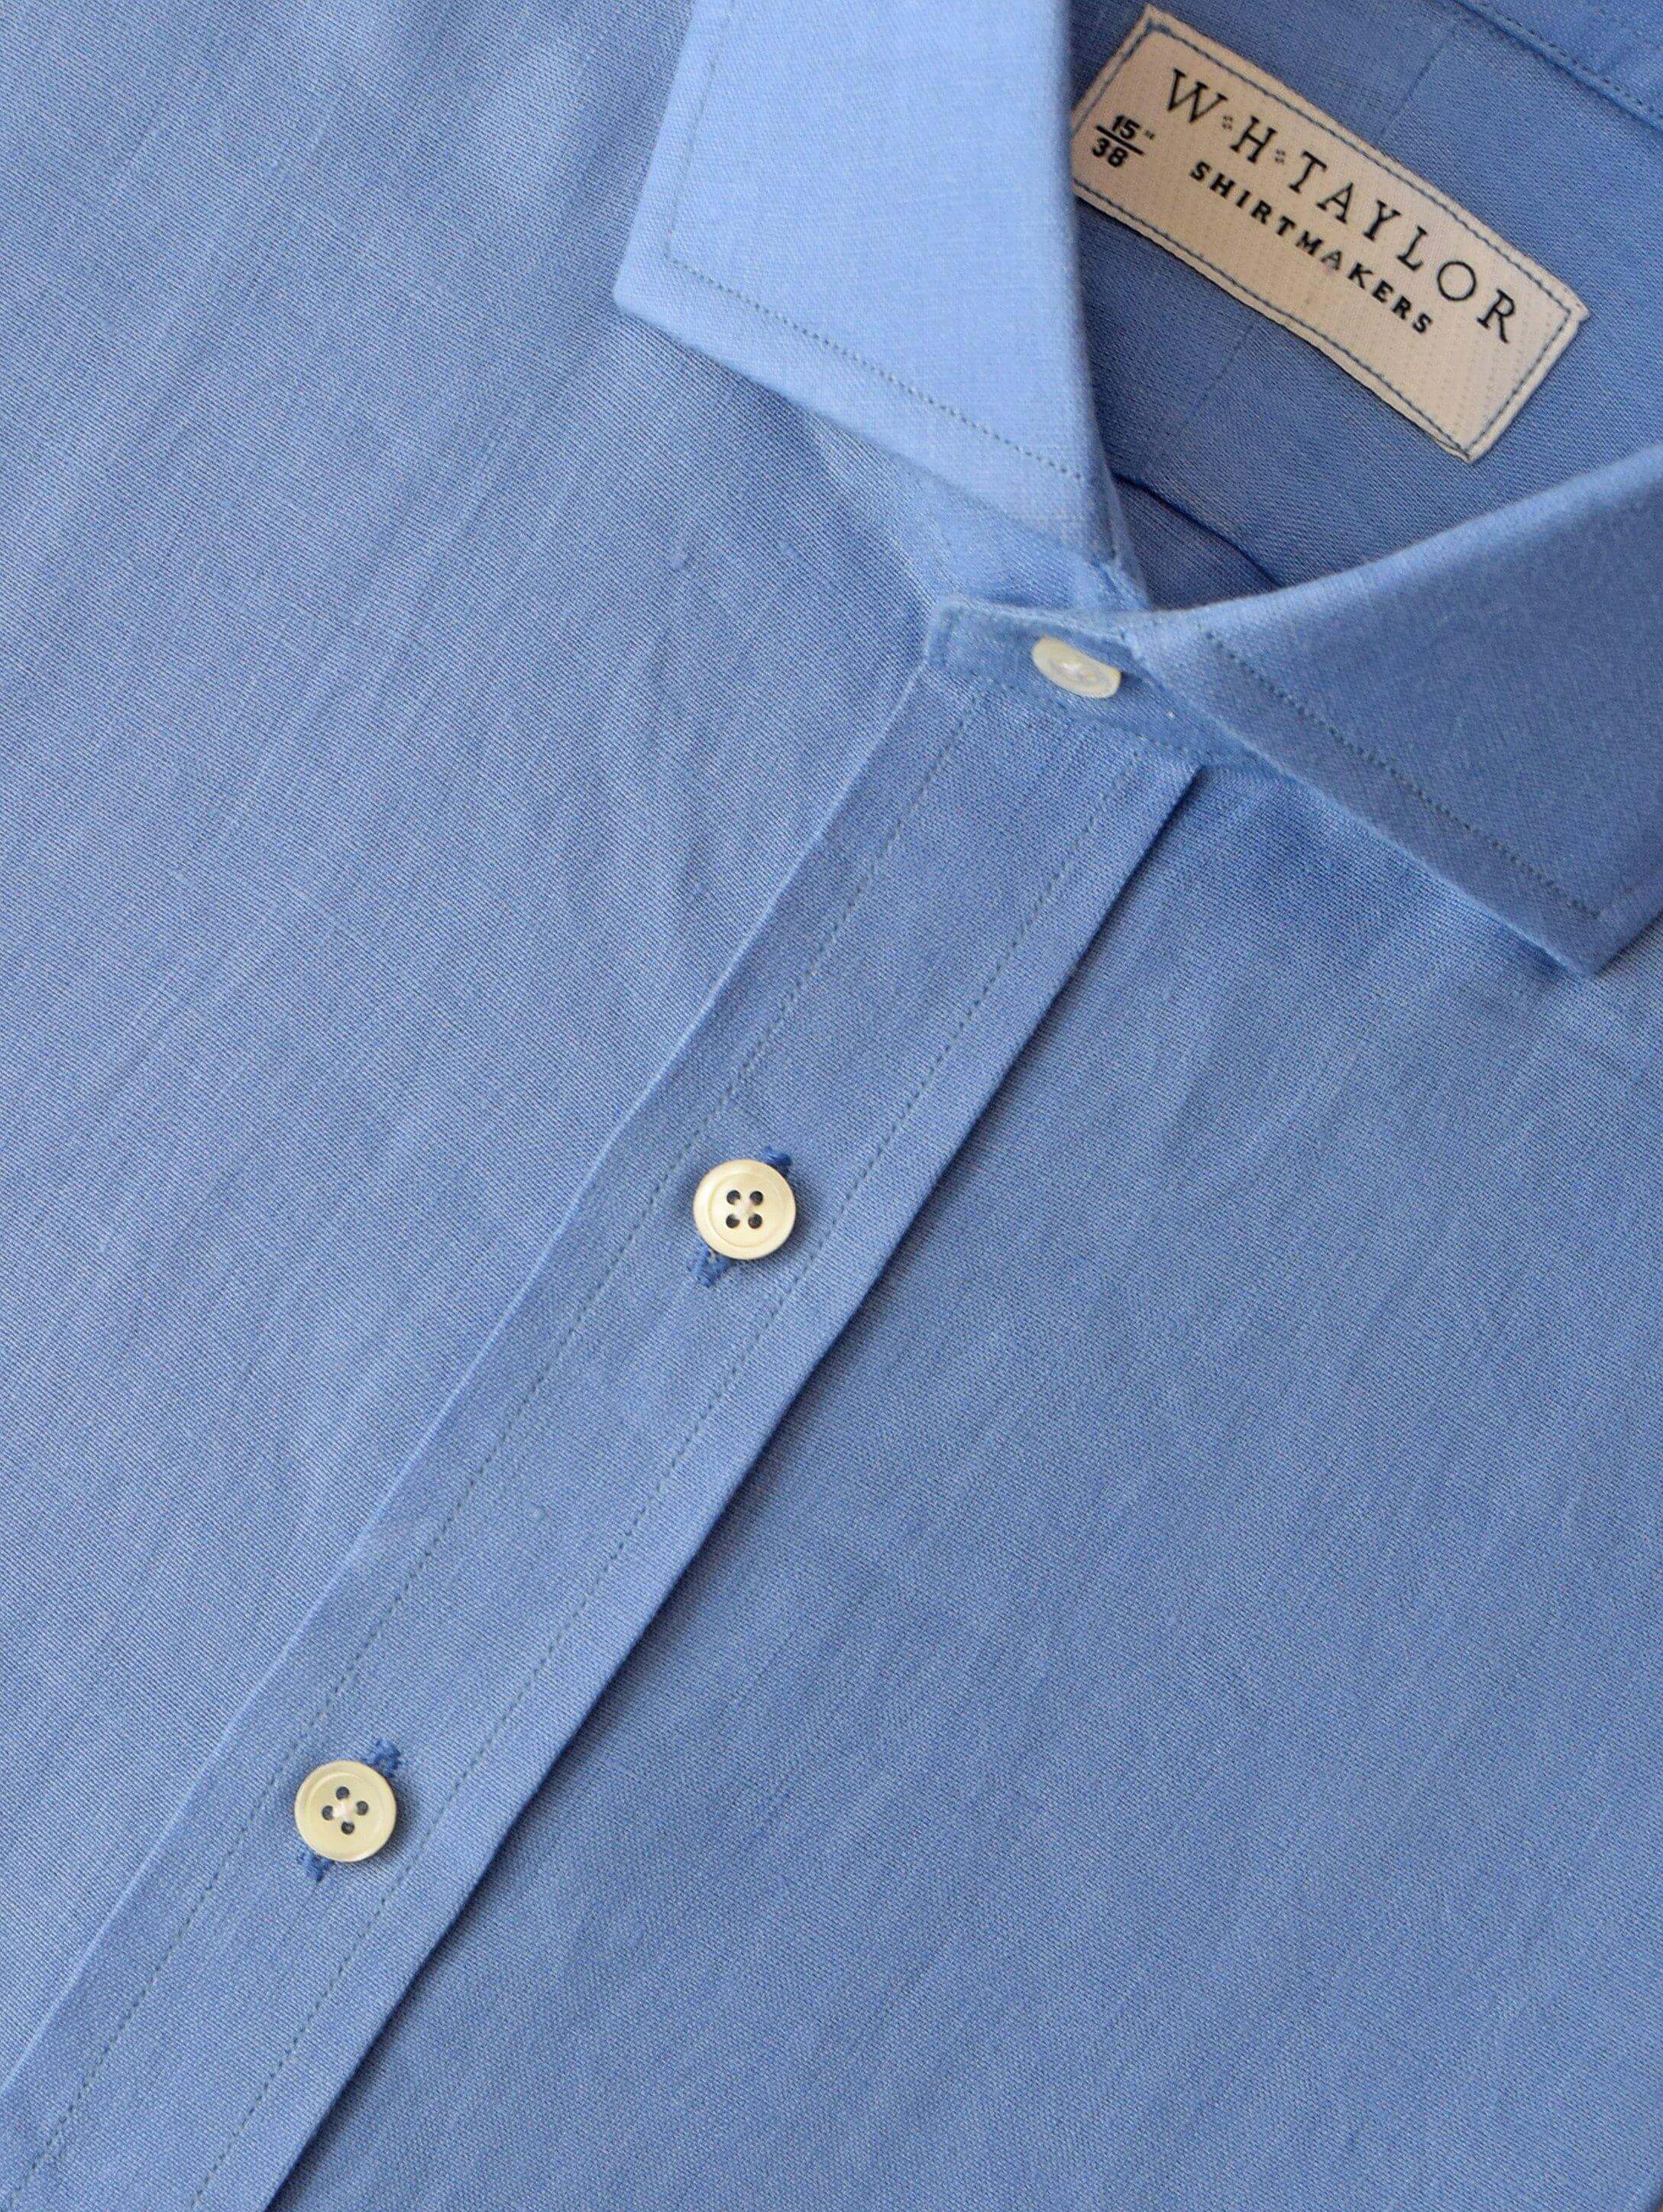 Washed Navy Linen Shirt by Proper Cloth